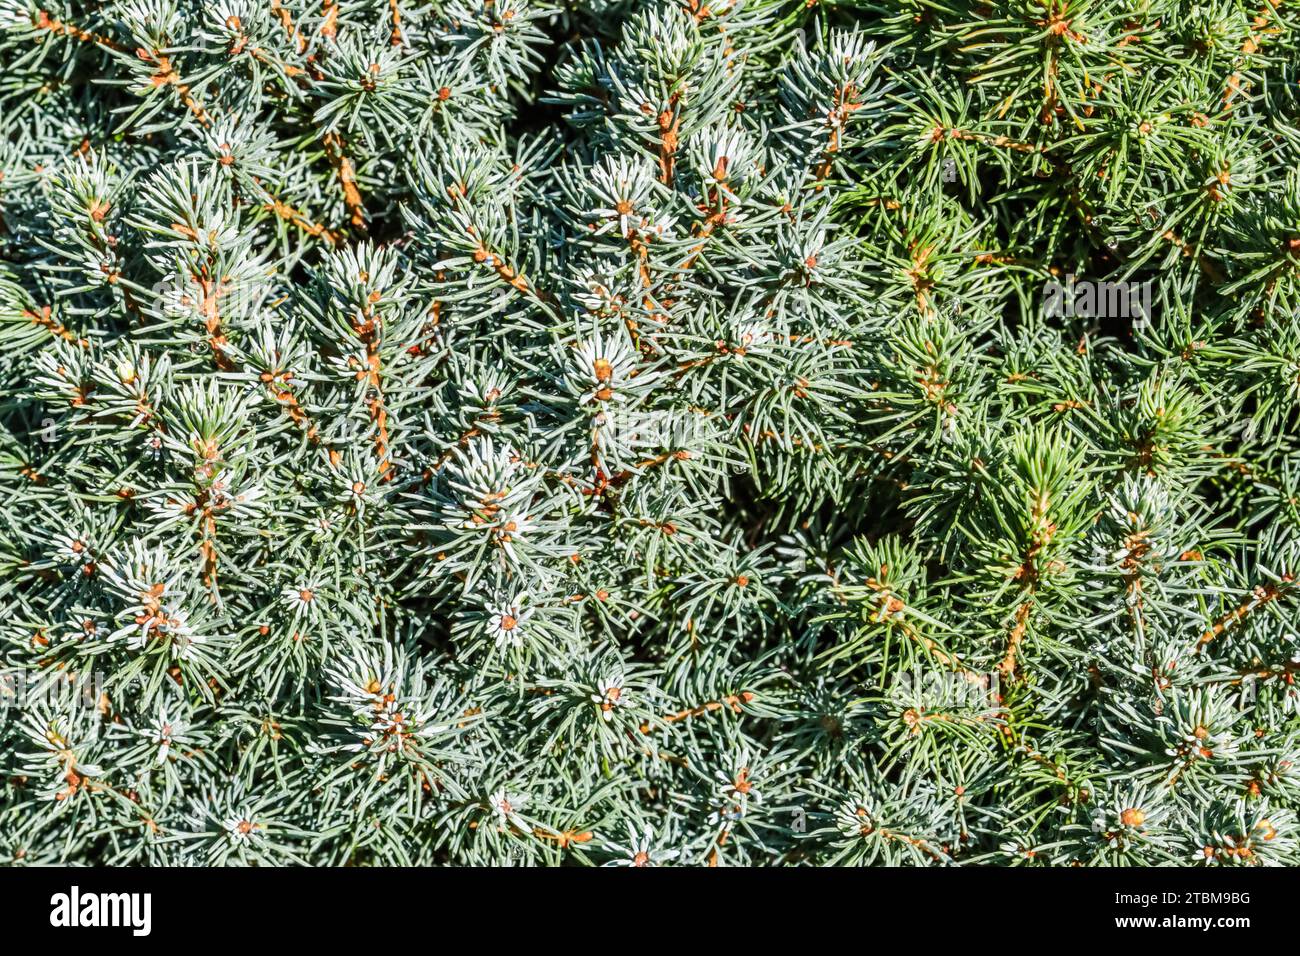 Closeup green leaves of decorative evergreen coniferous tree Canadian spruce (Picea) glauca with drops of water after the rain. Natural background Stock Photo